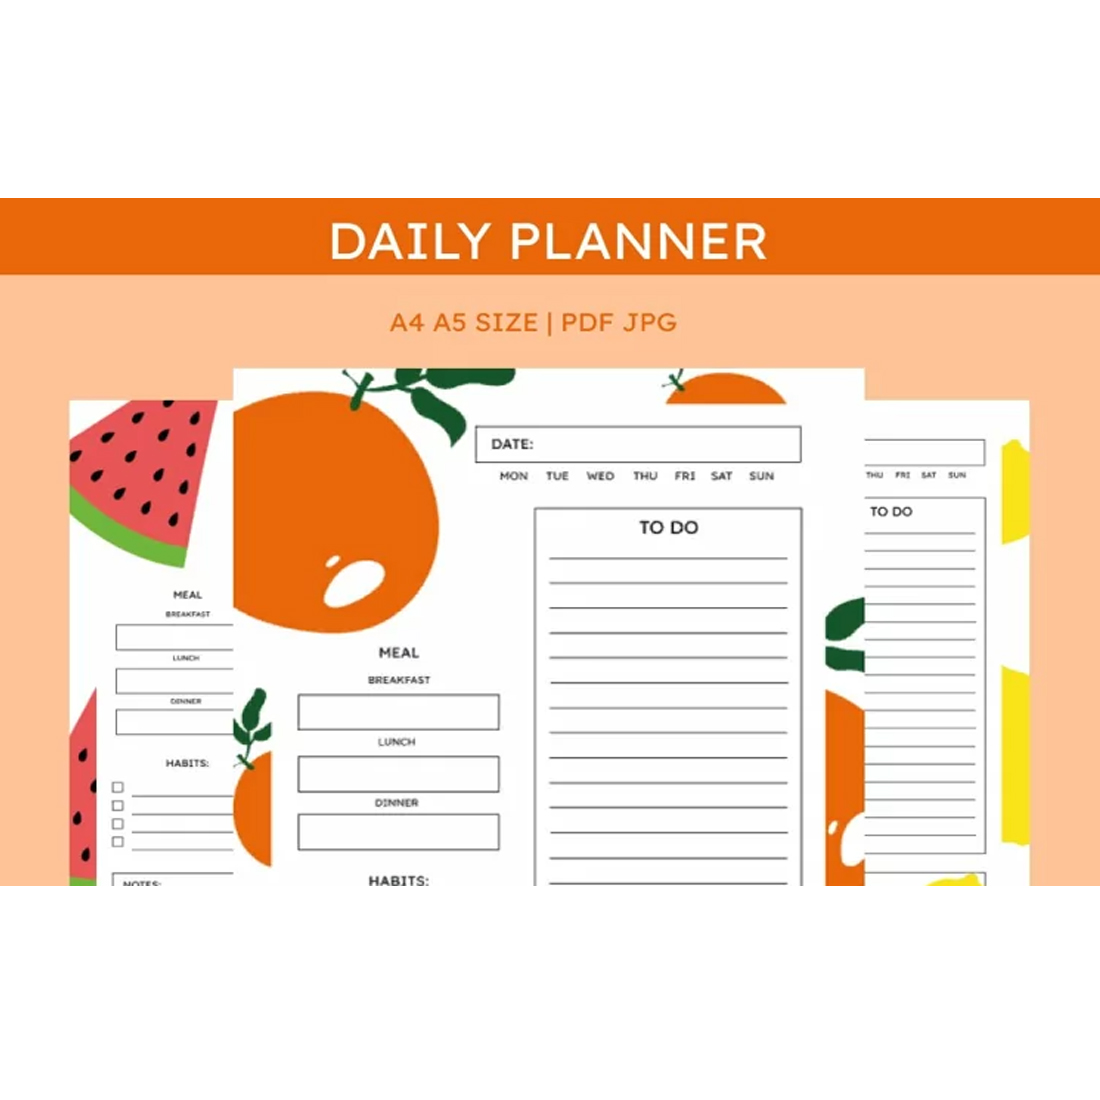 Daily planner printable | Cute daily planner preview image.